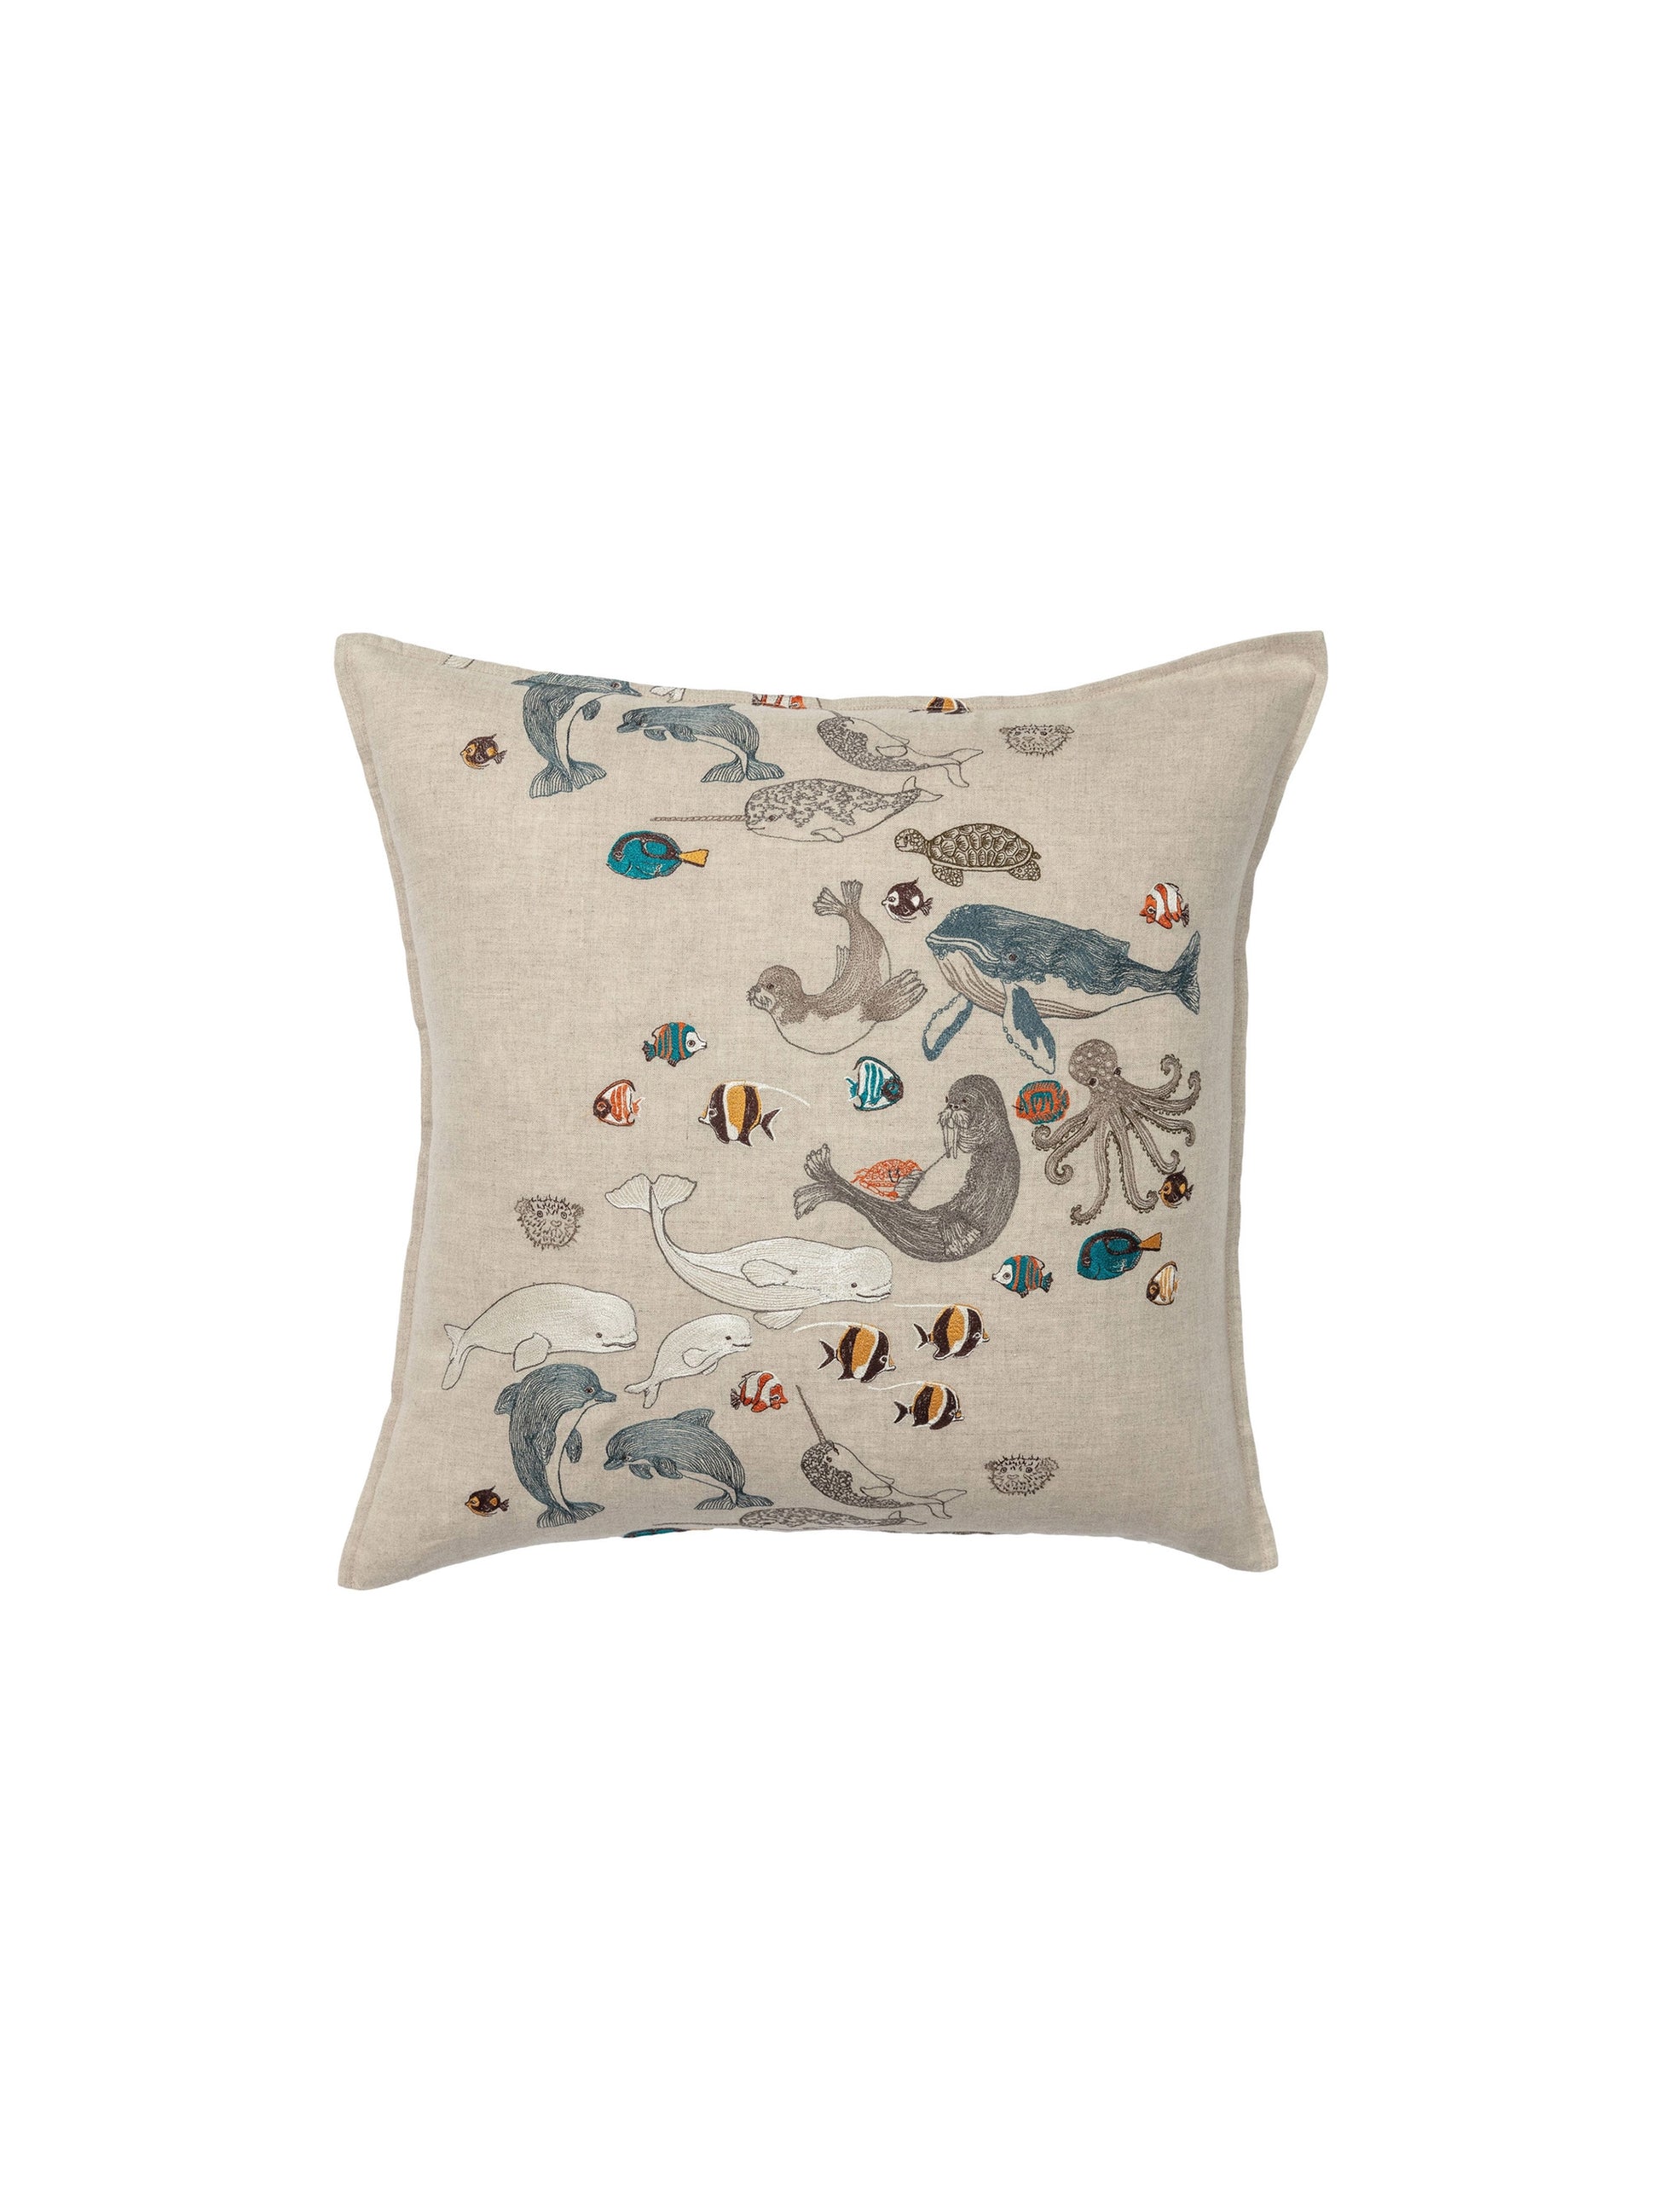 Coral and Tusk Swim Team Pillow Weston Table